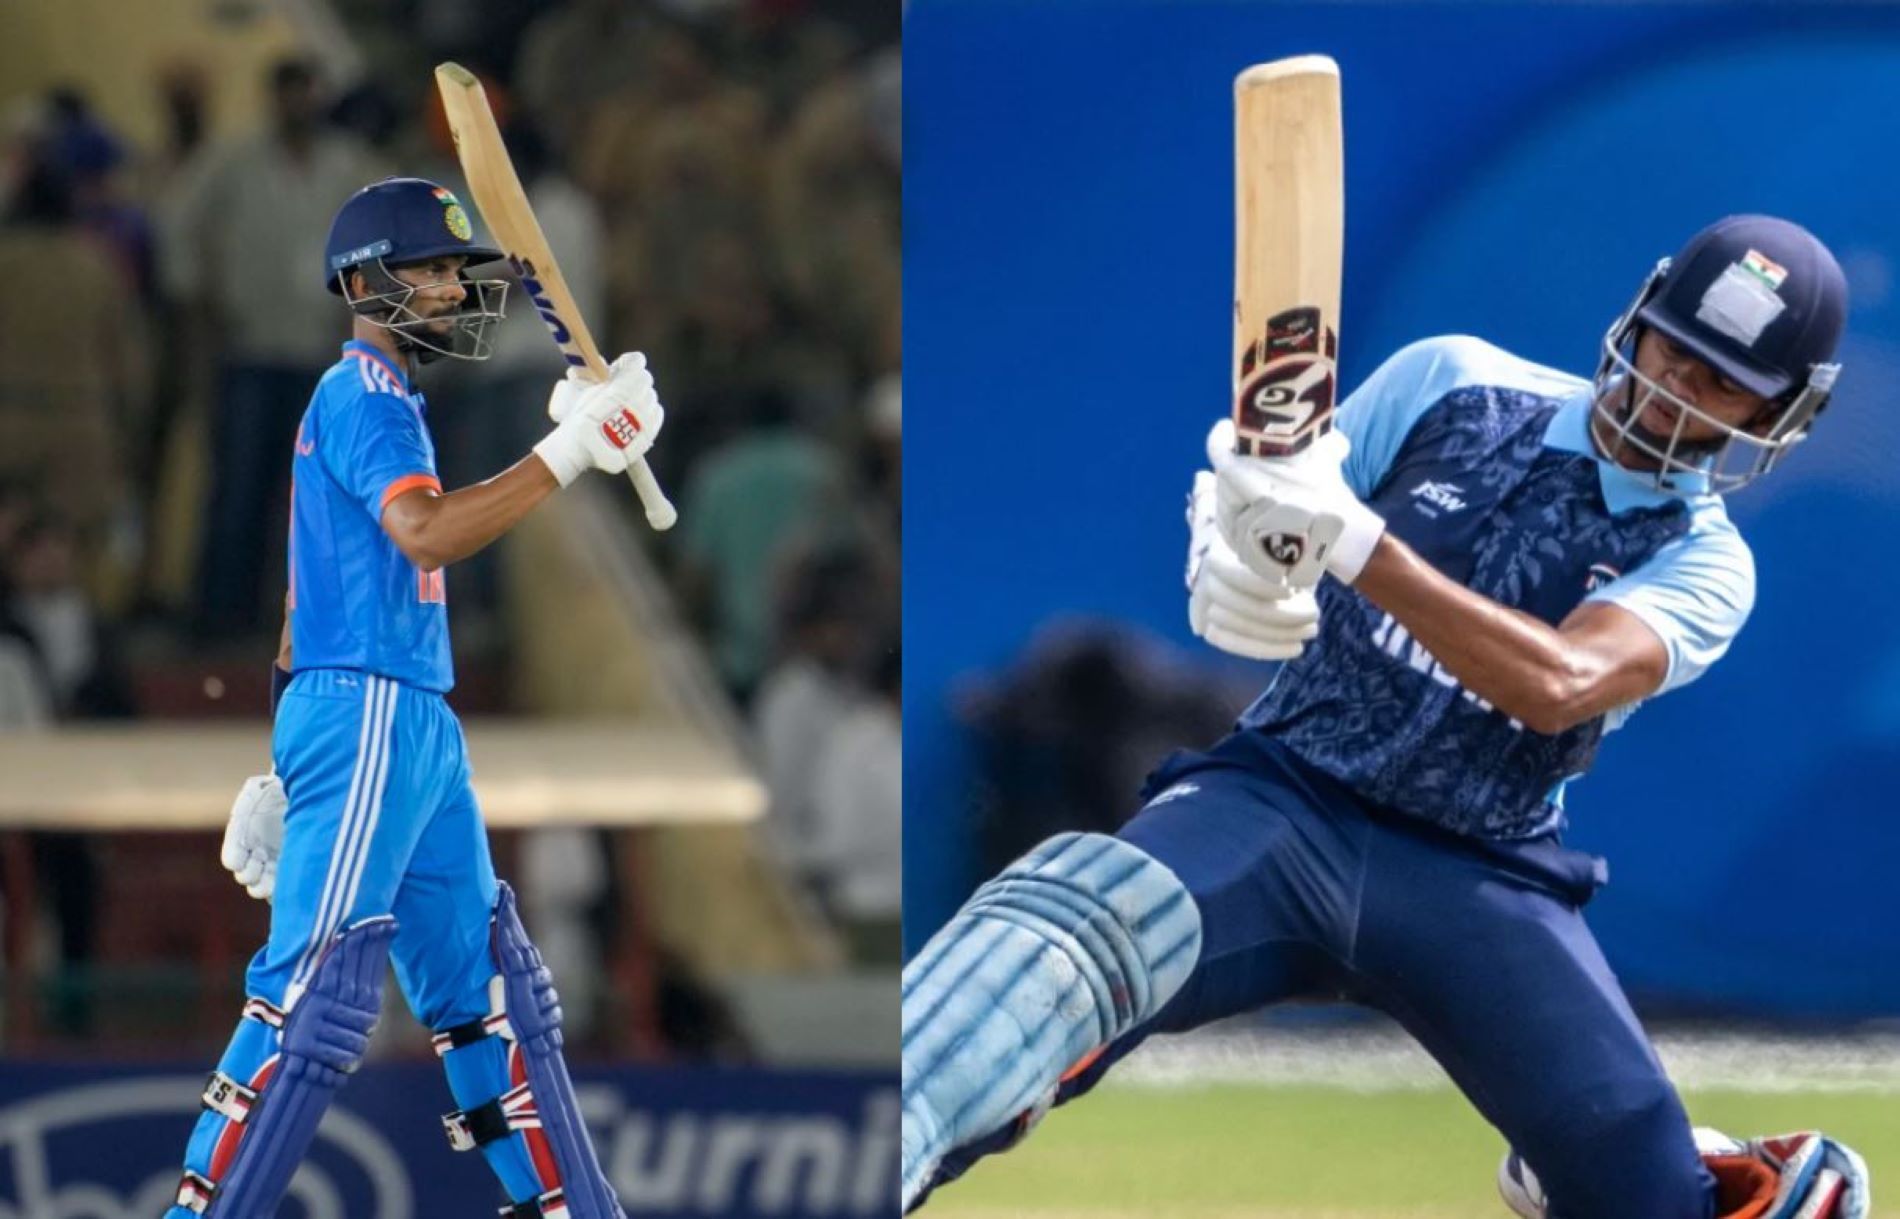 The duo have been in excellent recent form in international cricket.